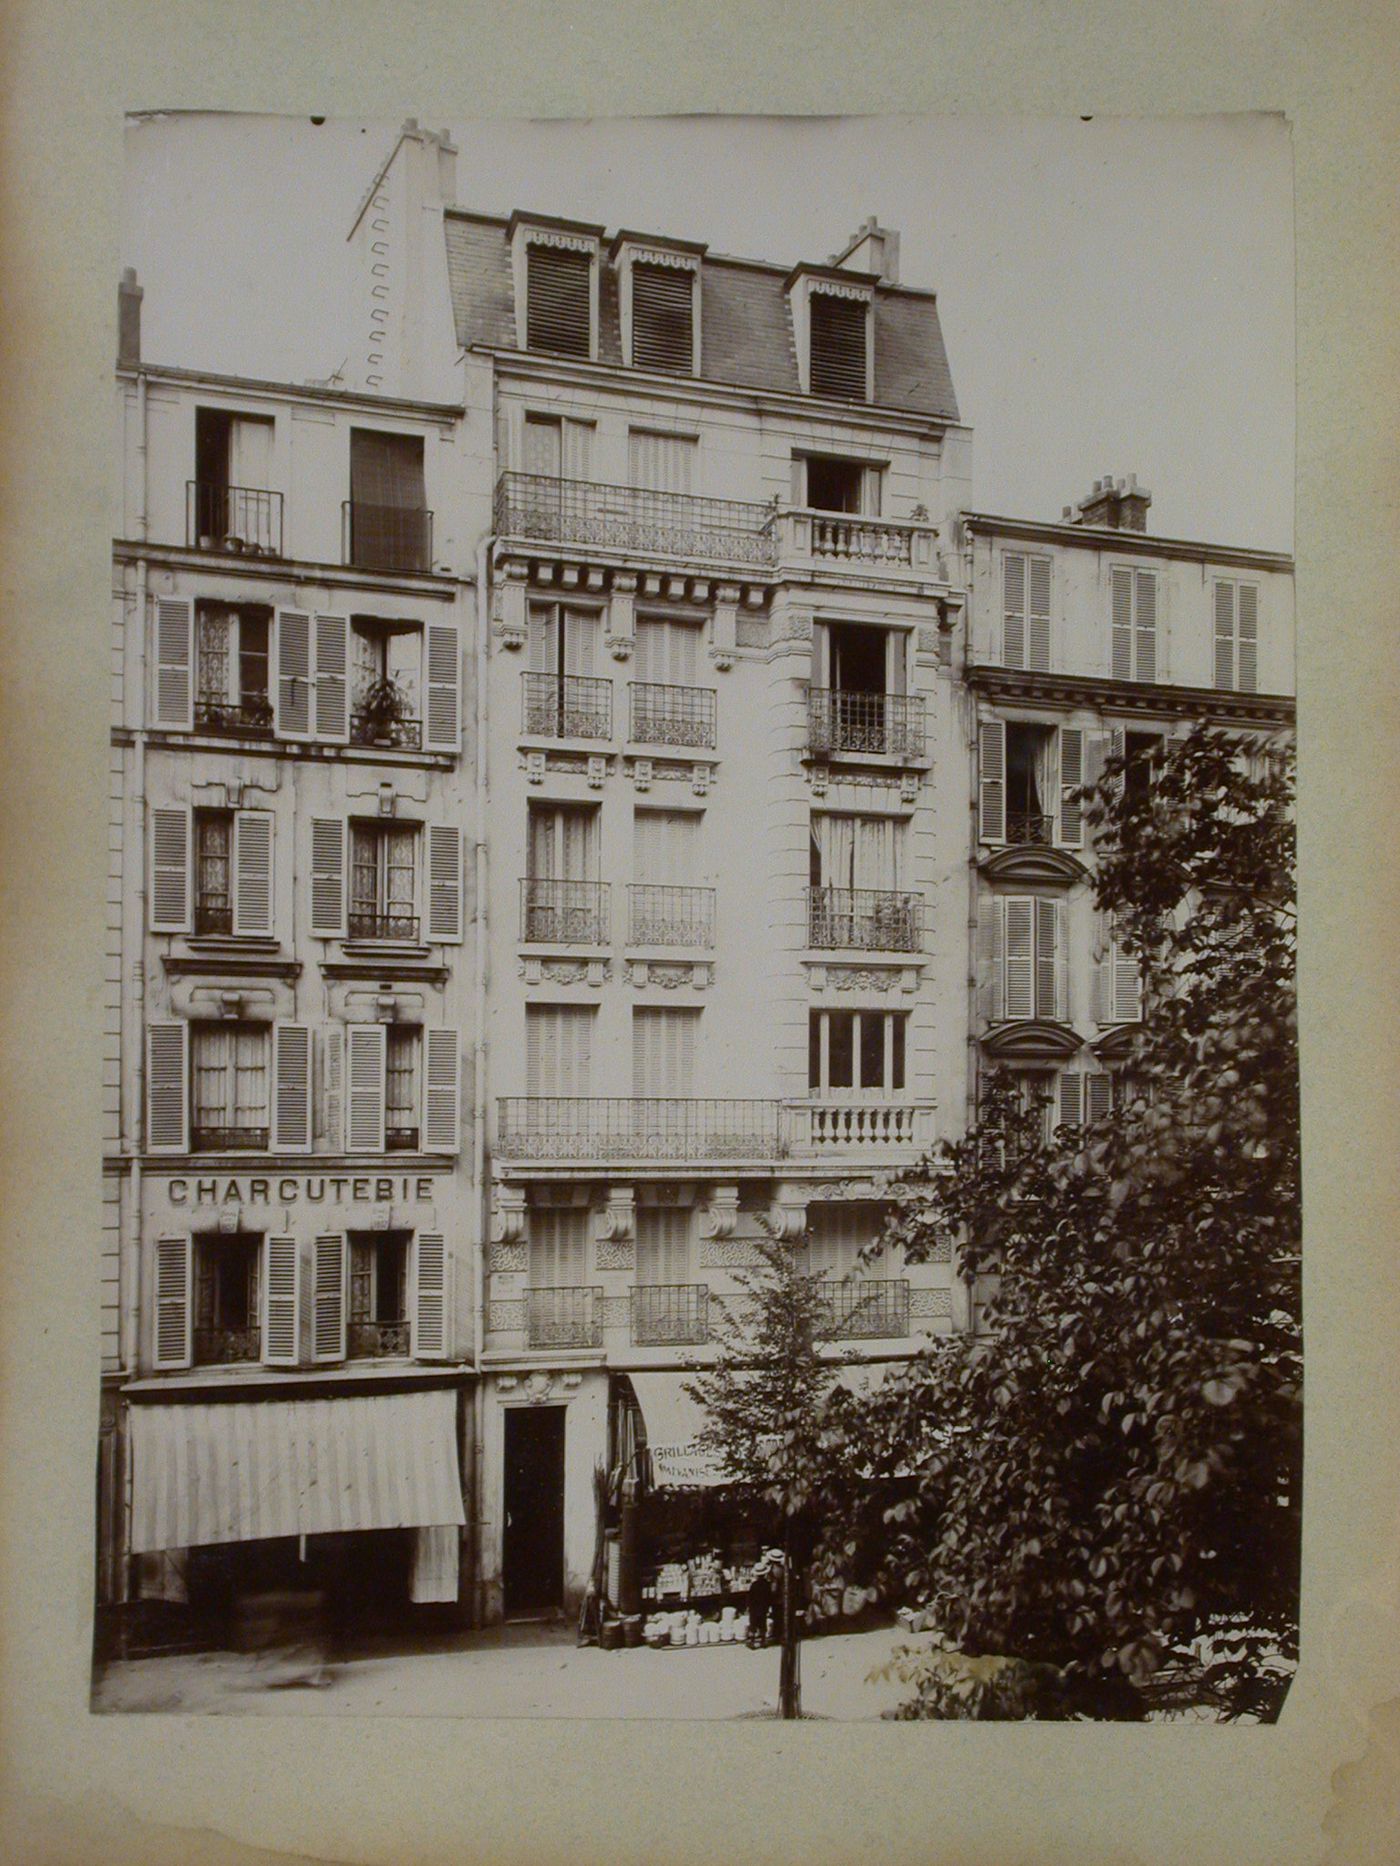 View of stores and apartment houses, Paris, France